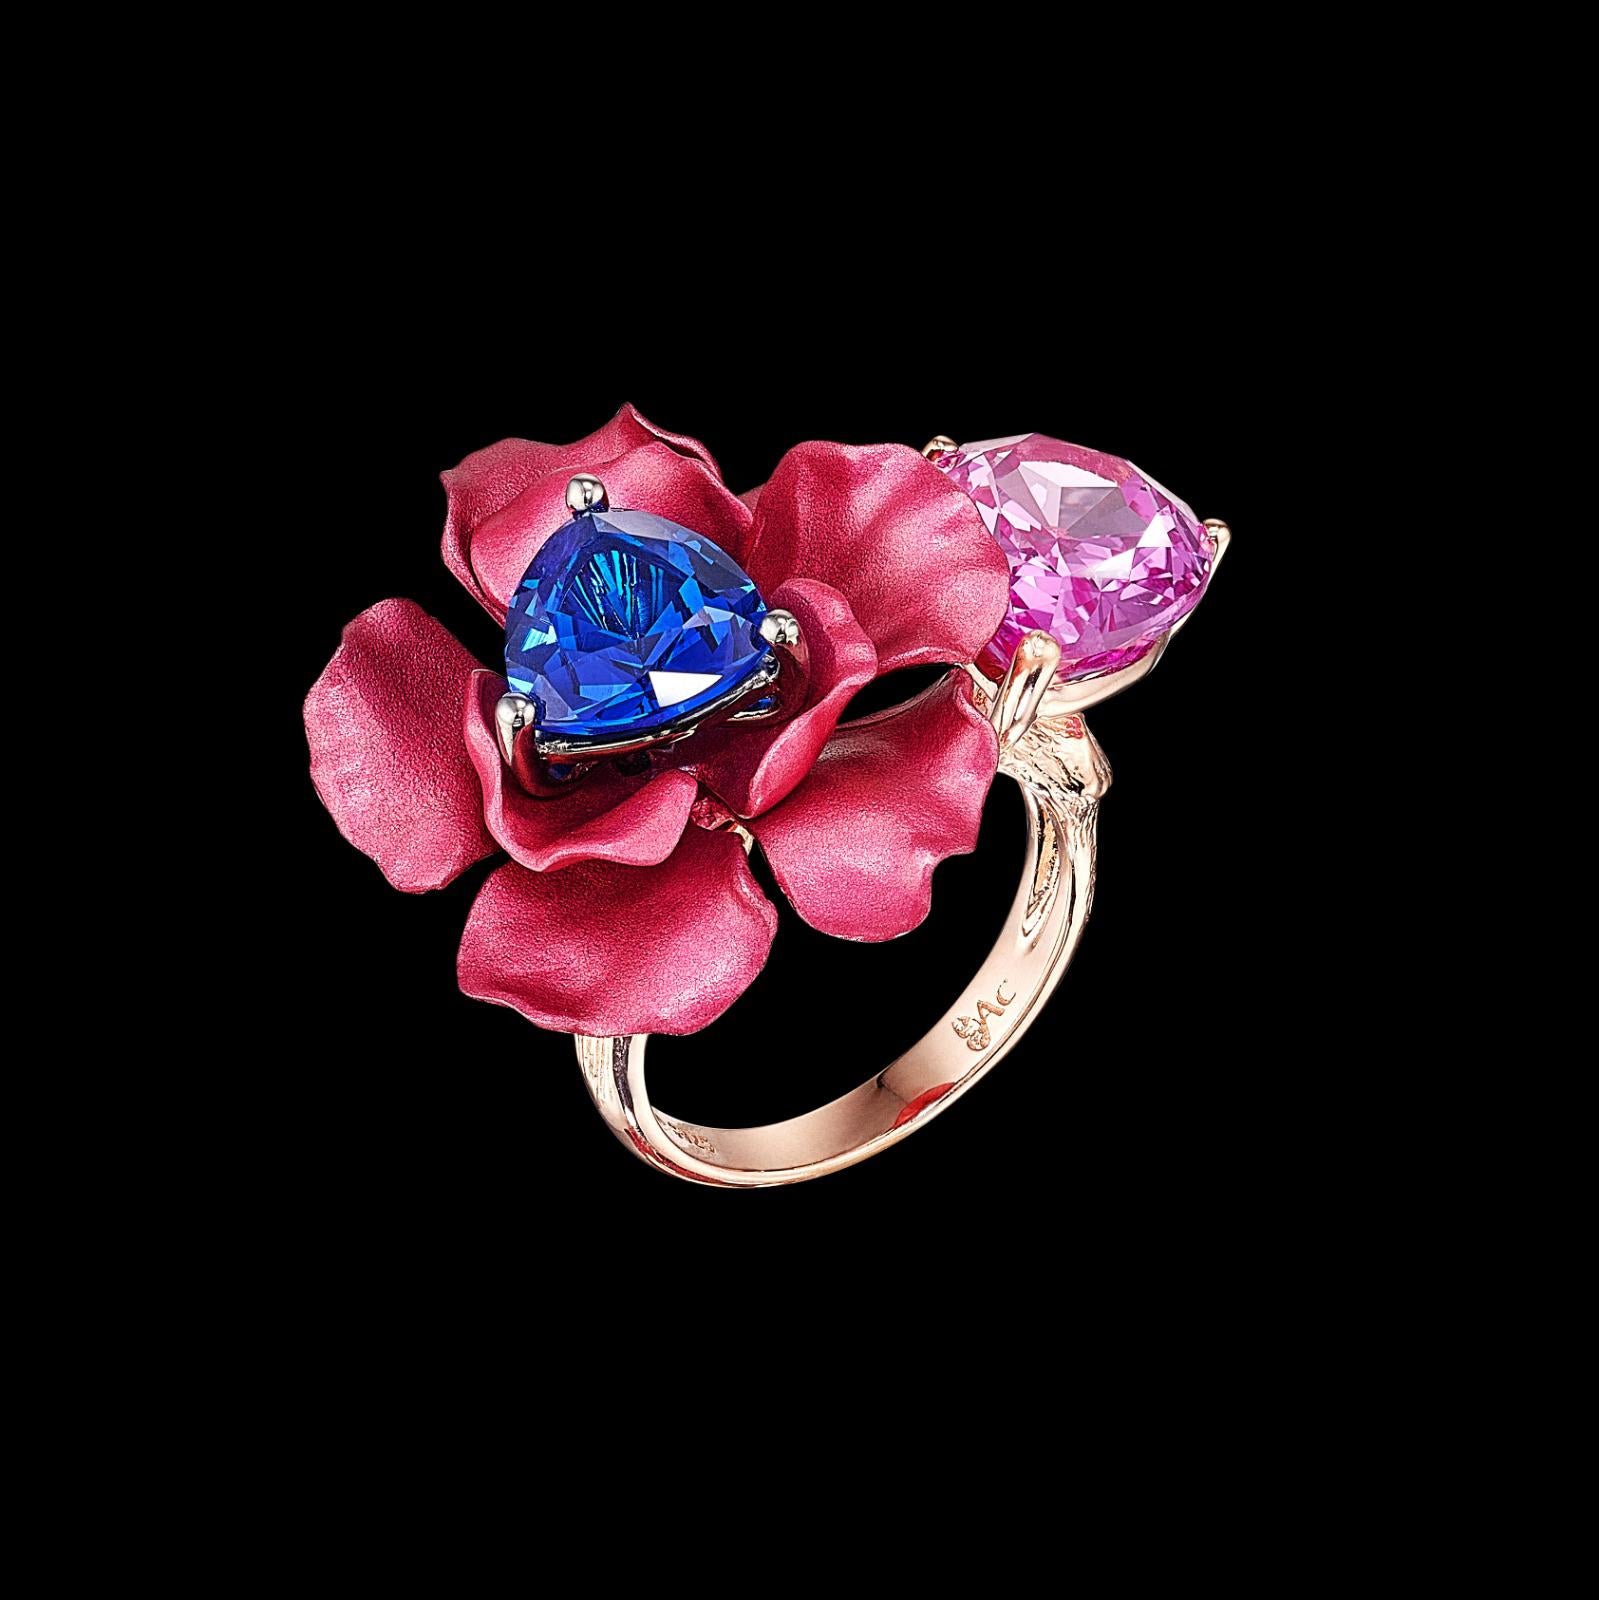 Fuchsia Sapphire Bloom Ring, Ring, Anabela Chan Joaillerie - Fine jewelry with laboratory grown and created gemstones hand-crafted in the United Kingdom. Anabela Chan Joaillerie is the first fine jewellery brand in the world to champion laboratory-grown and created gemstones with high jewellery design, artisanal craftsmanship and a focus on ethical and sustainable innovations.